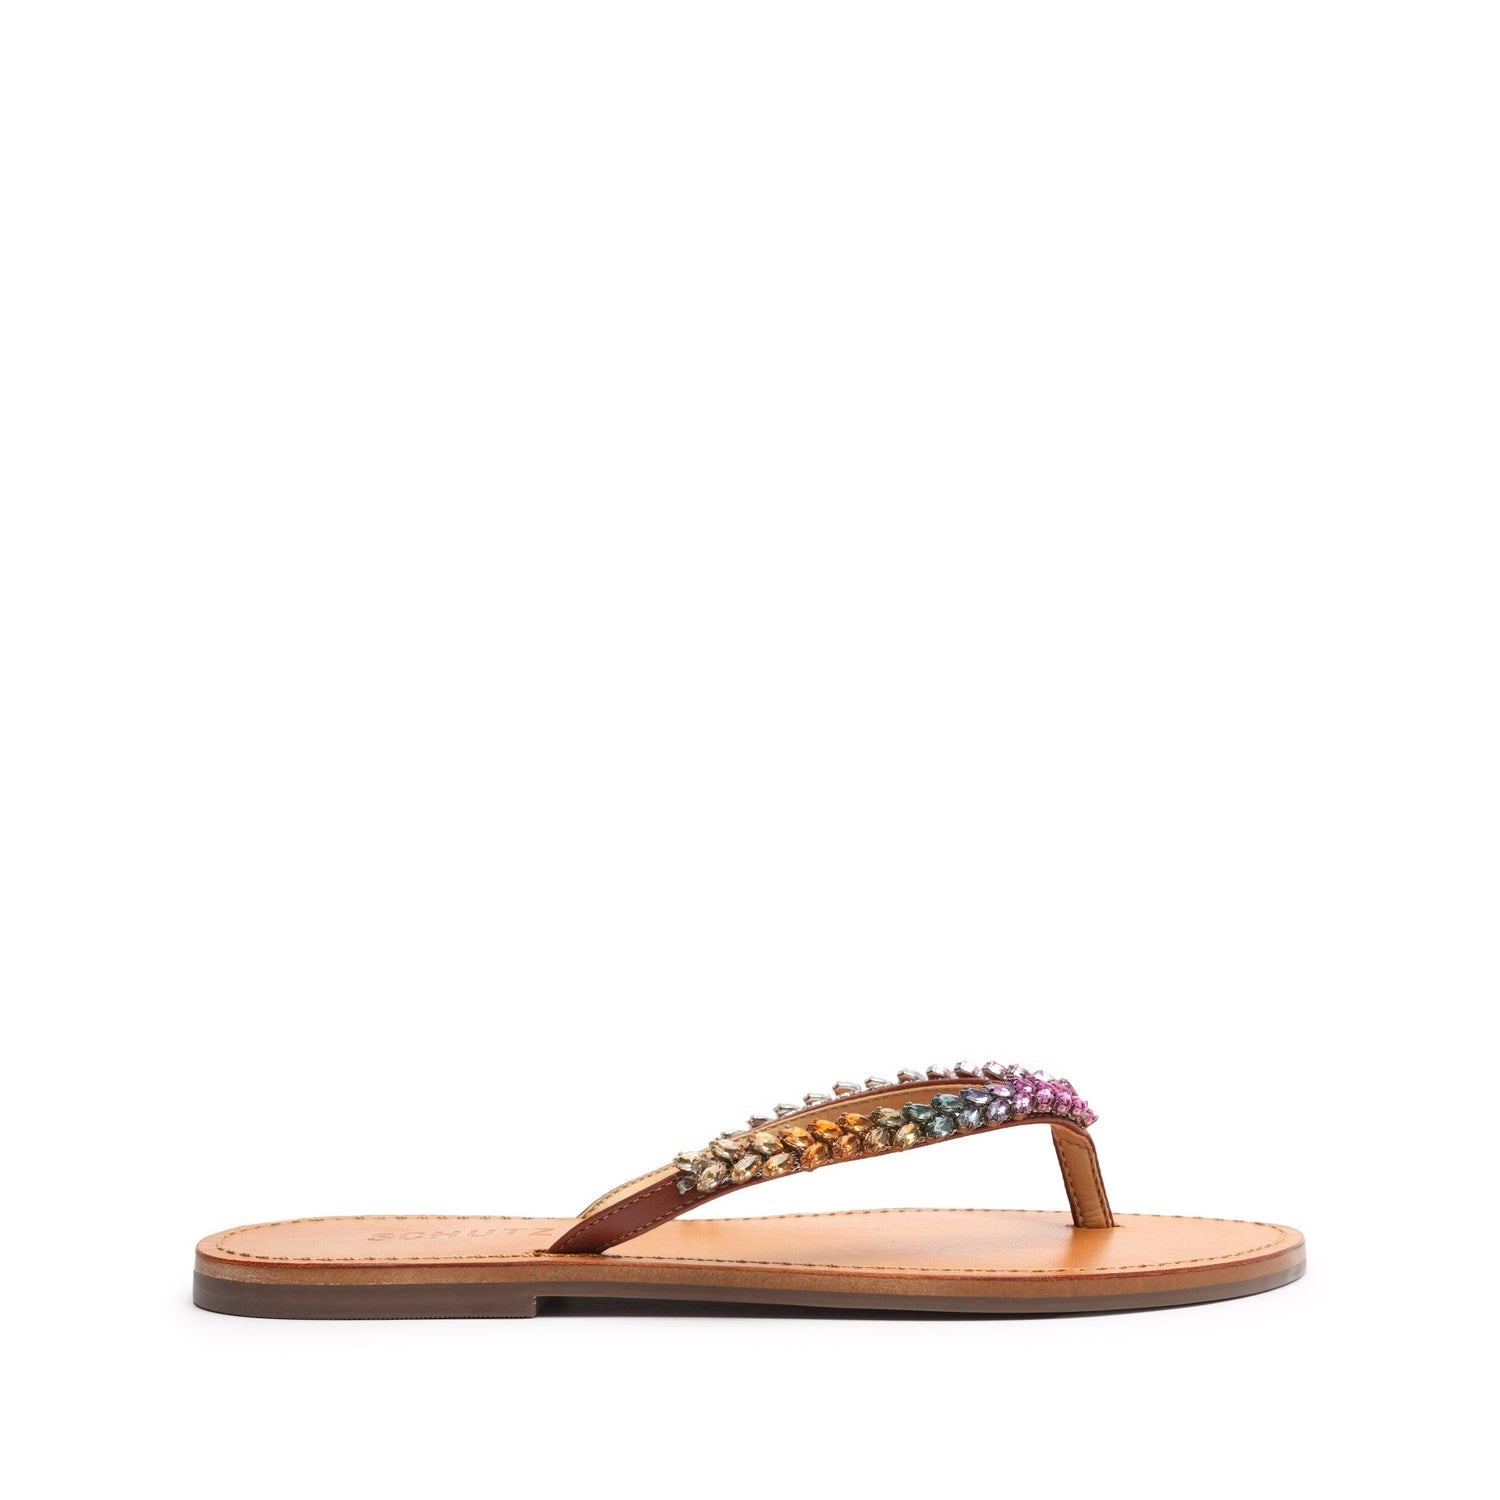 Belle Nappa Leather Sandal Flats Sale 5 Cooper Nappa Leather - Schutz Shoes